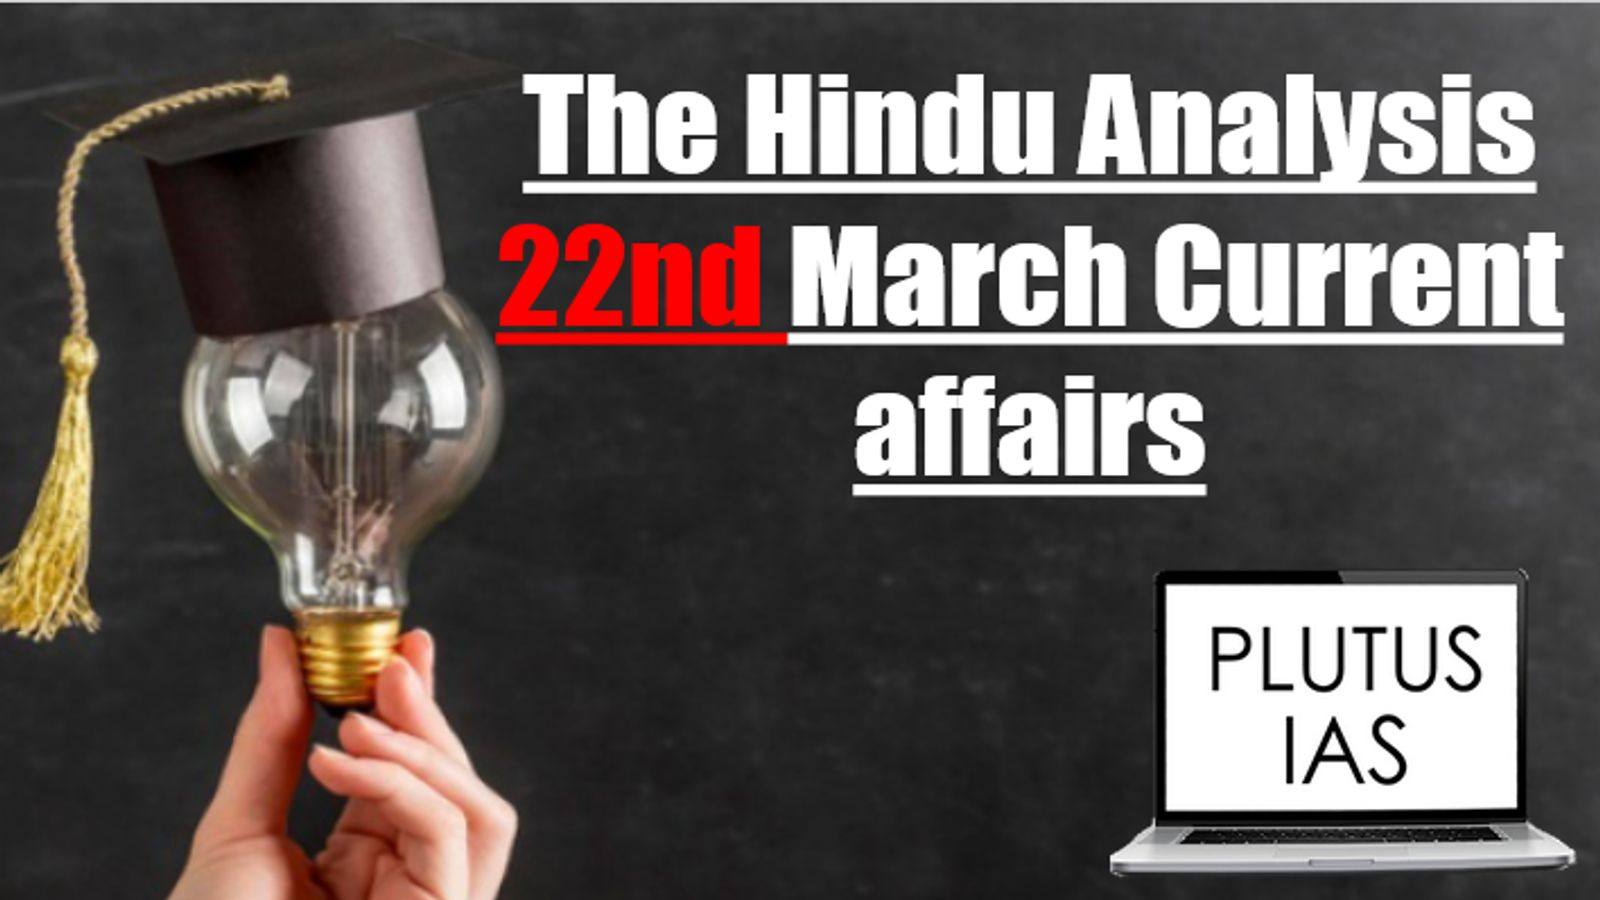 The Hindu Analysis 22nd March Current Affairs